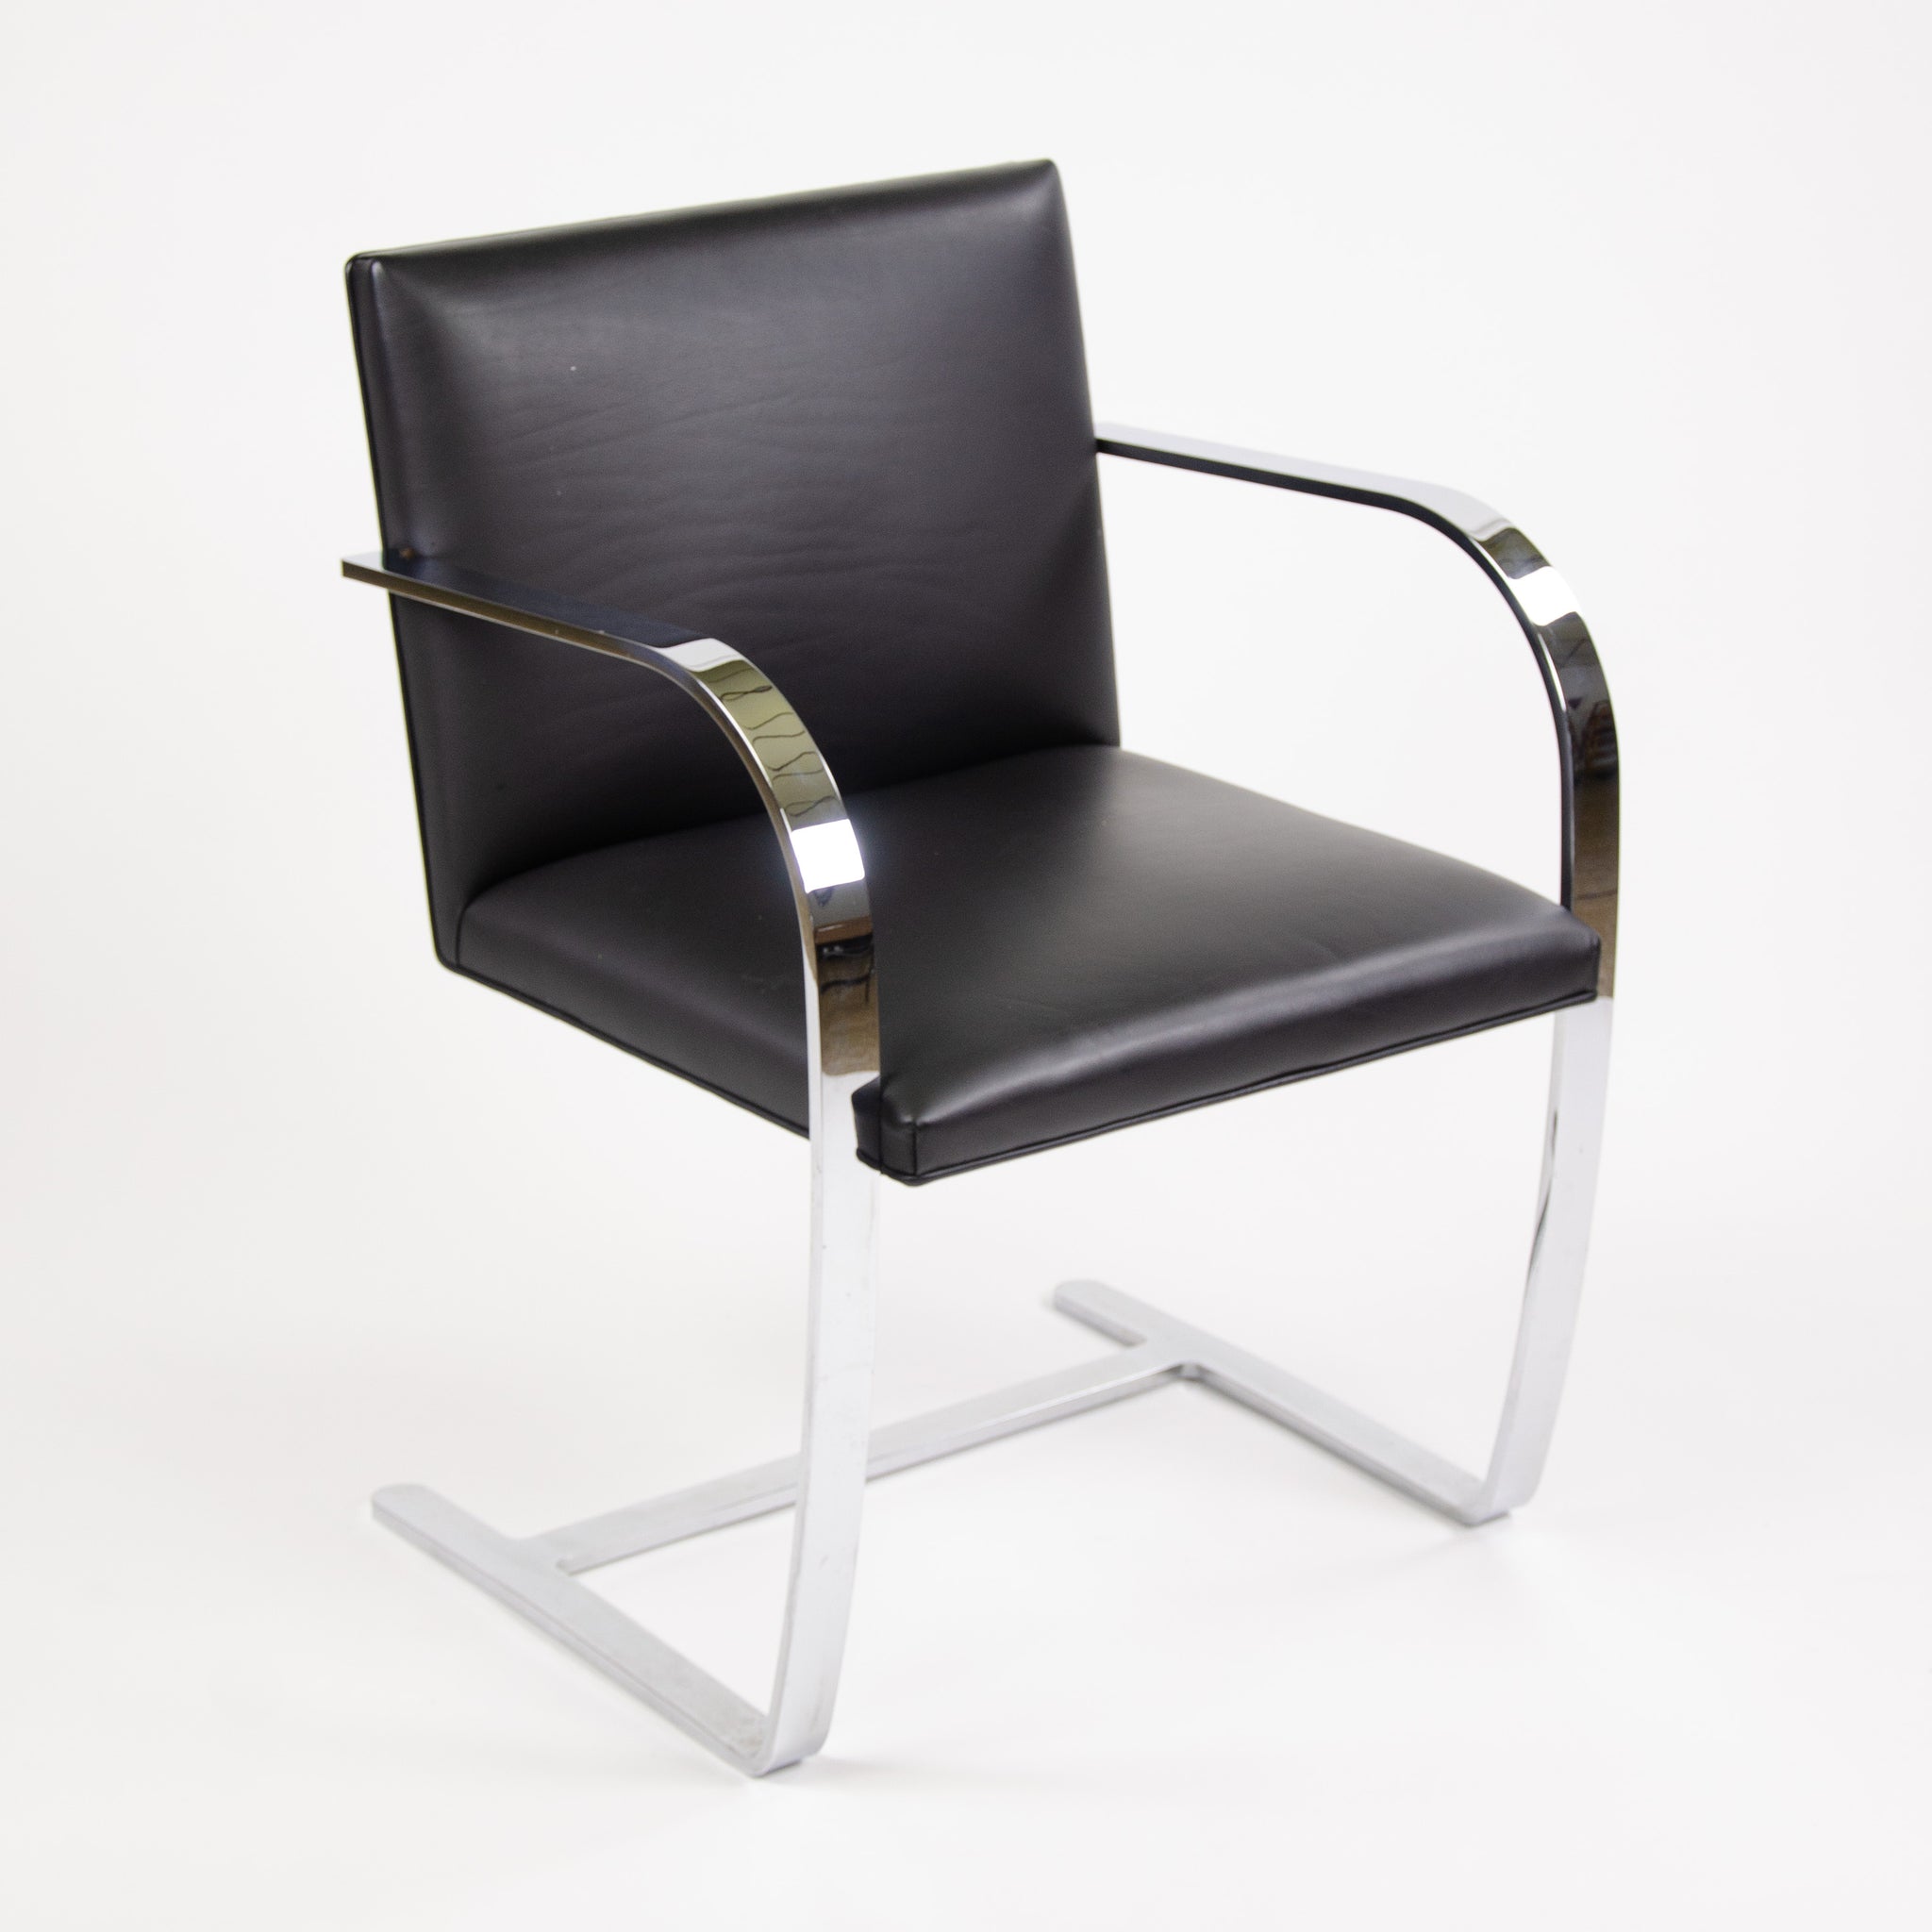 SOLD Knoll STAINLESS Mies Van Der Rohe Brno Chairs Black Leather Sets Available 2000s MINT